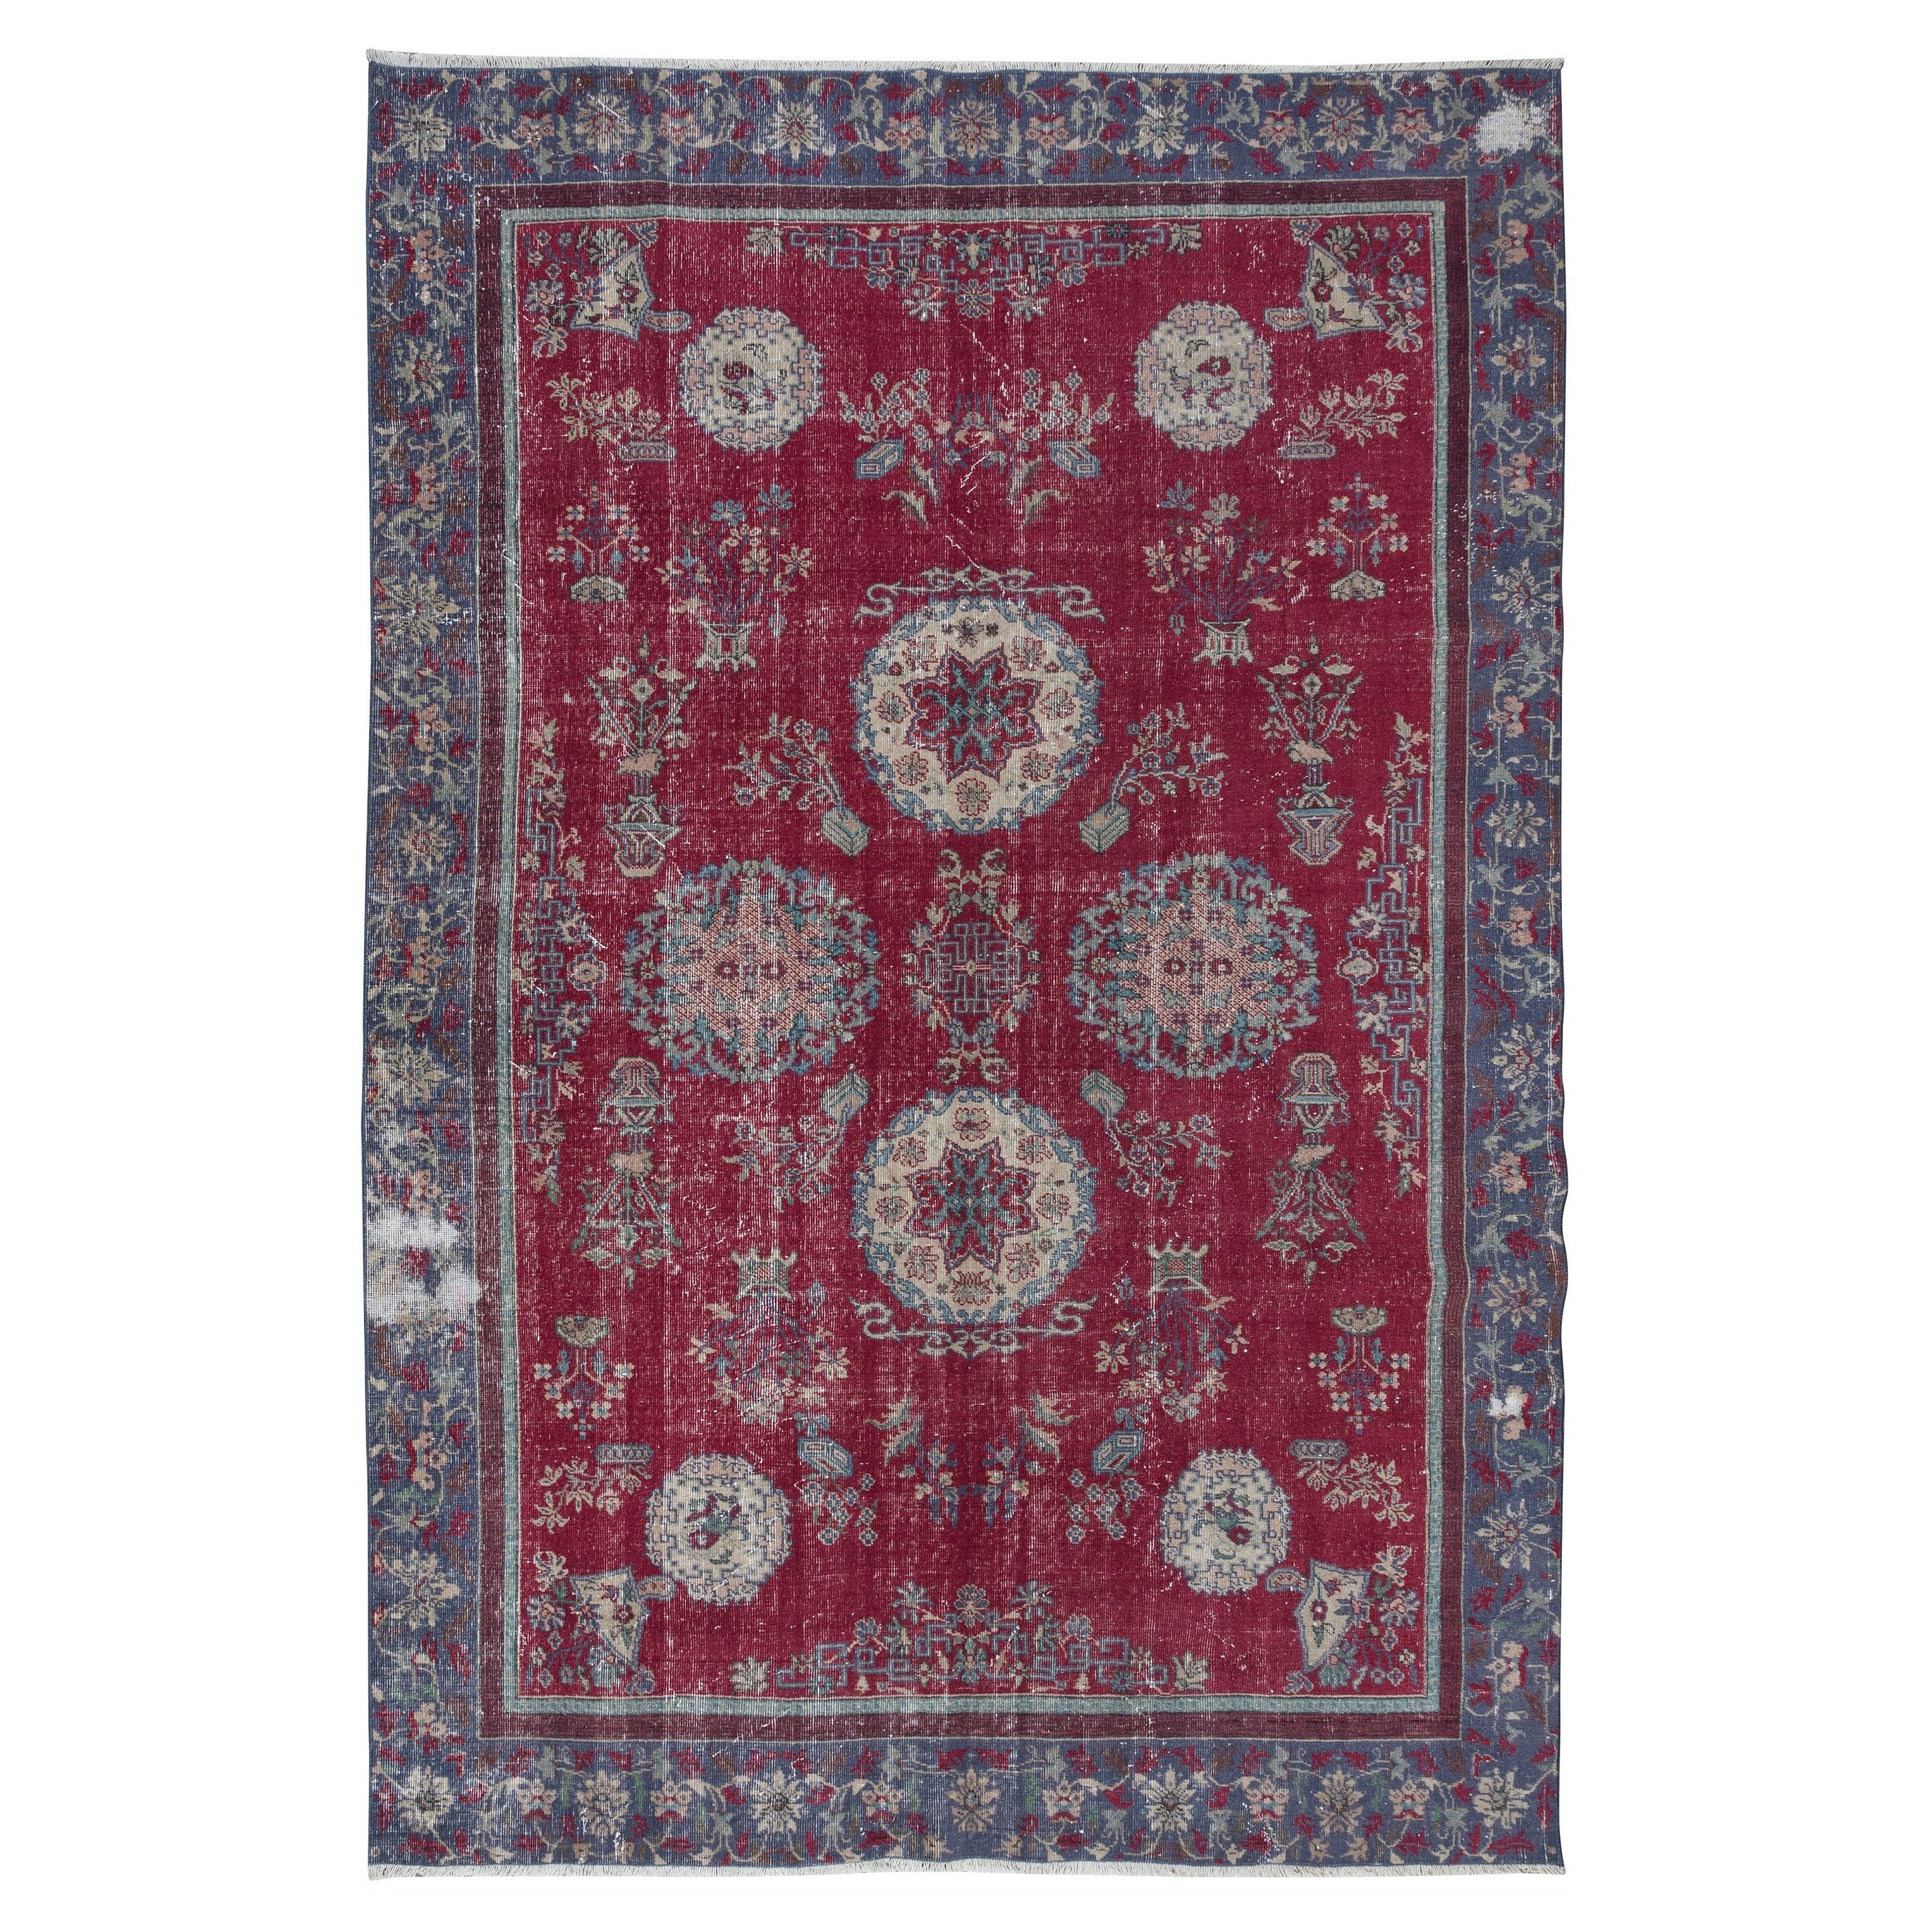 7x10.5 Ft One of a kind Vintage Handmade Turkish Wool Area Rug in Red